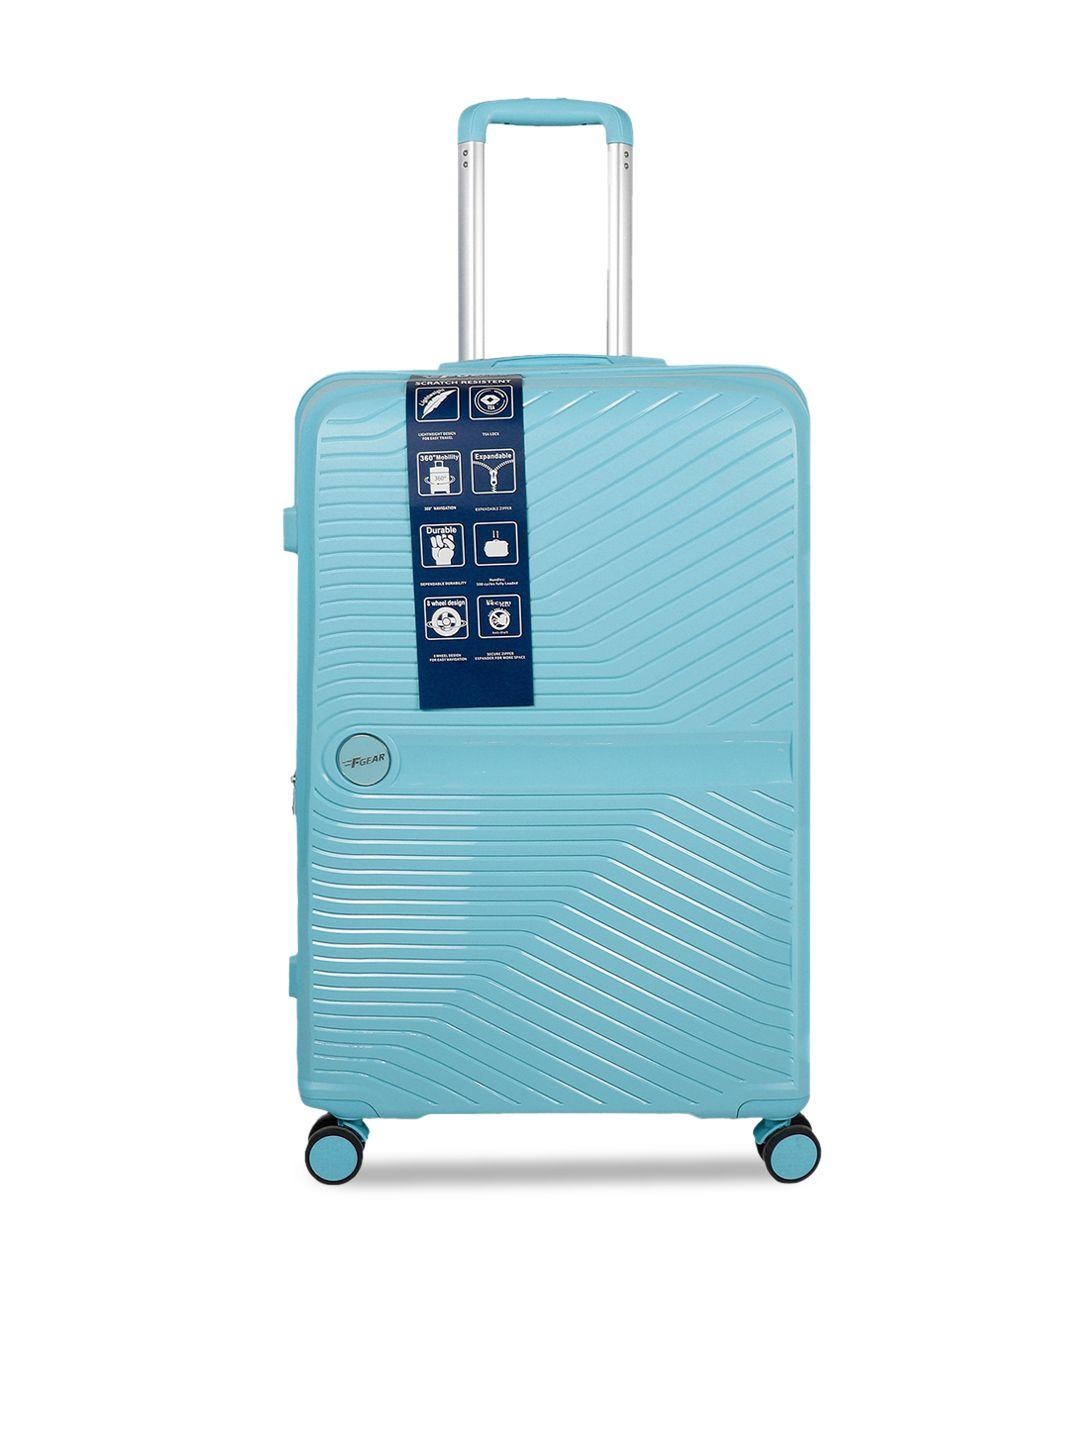 F Gear Hard-Sided Textured Large Trolley Suitcase